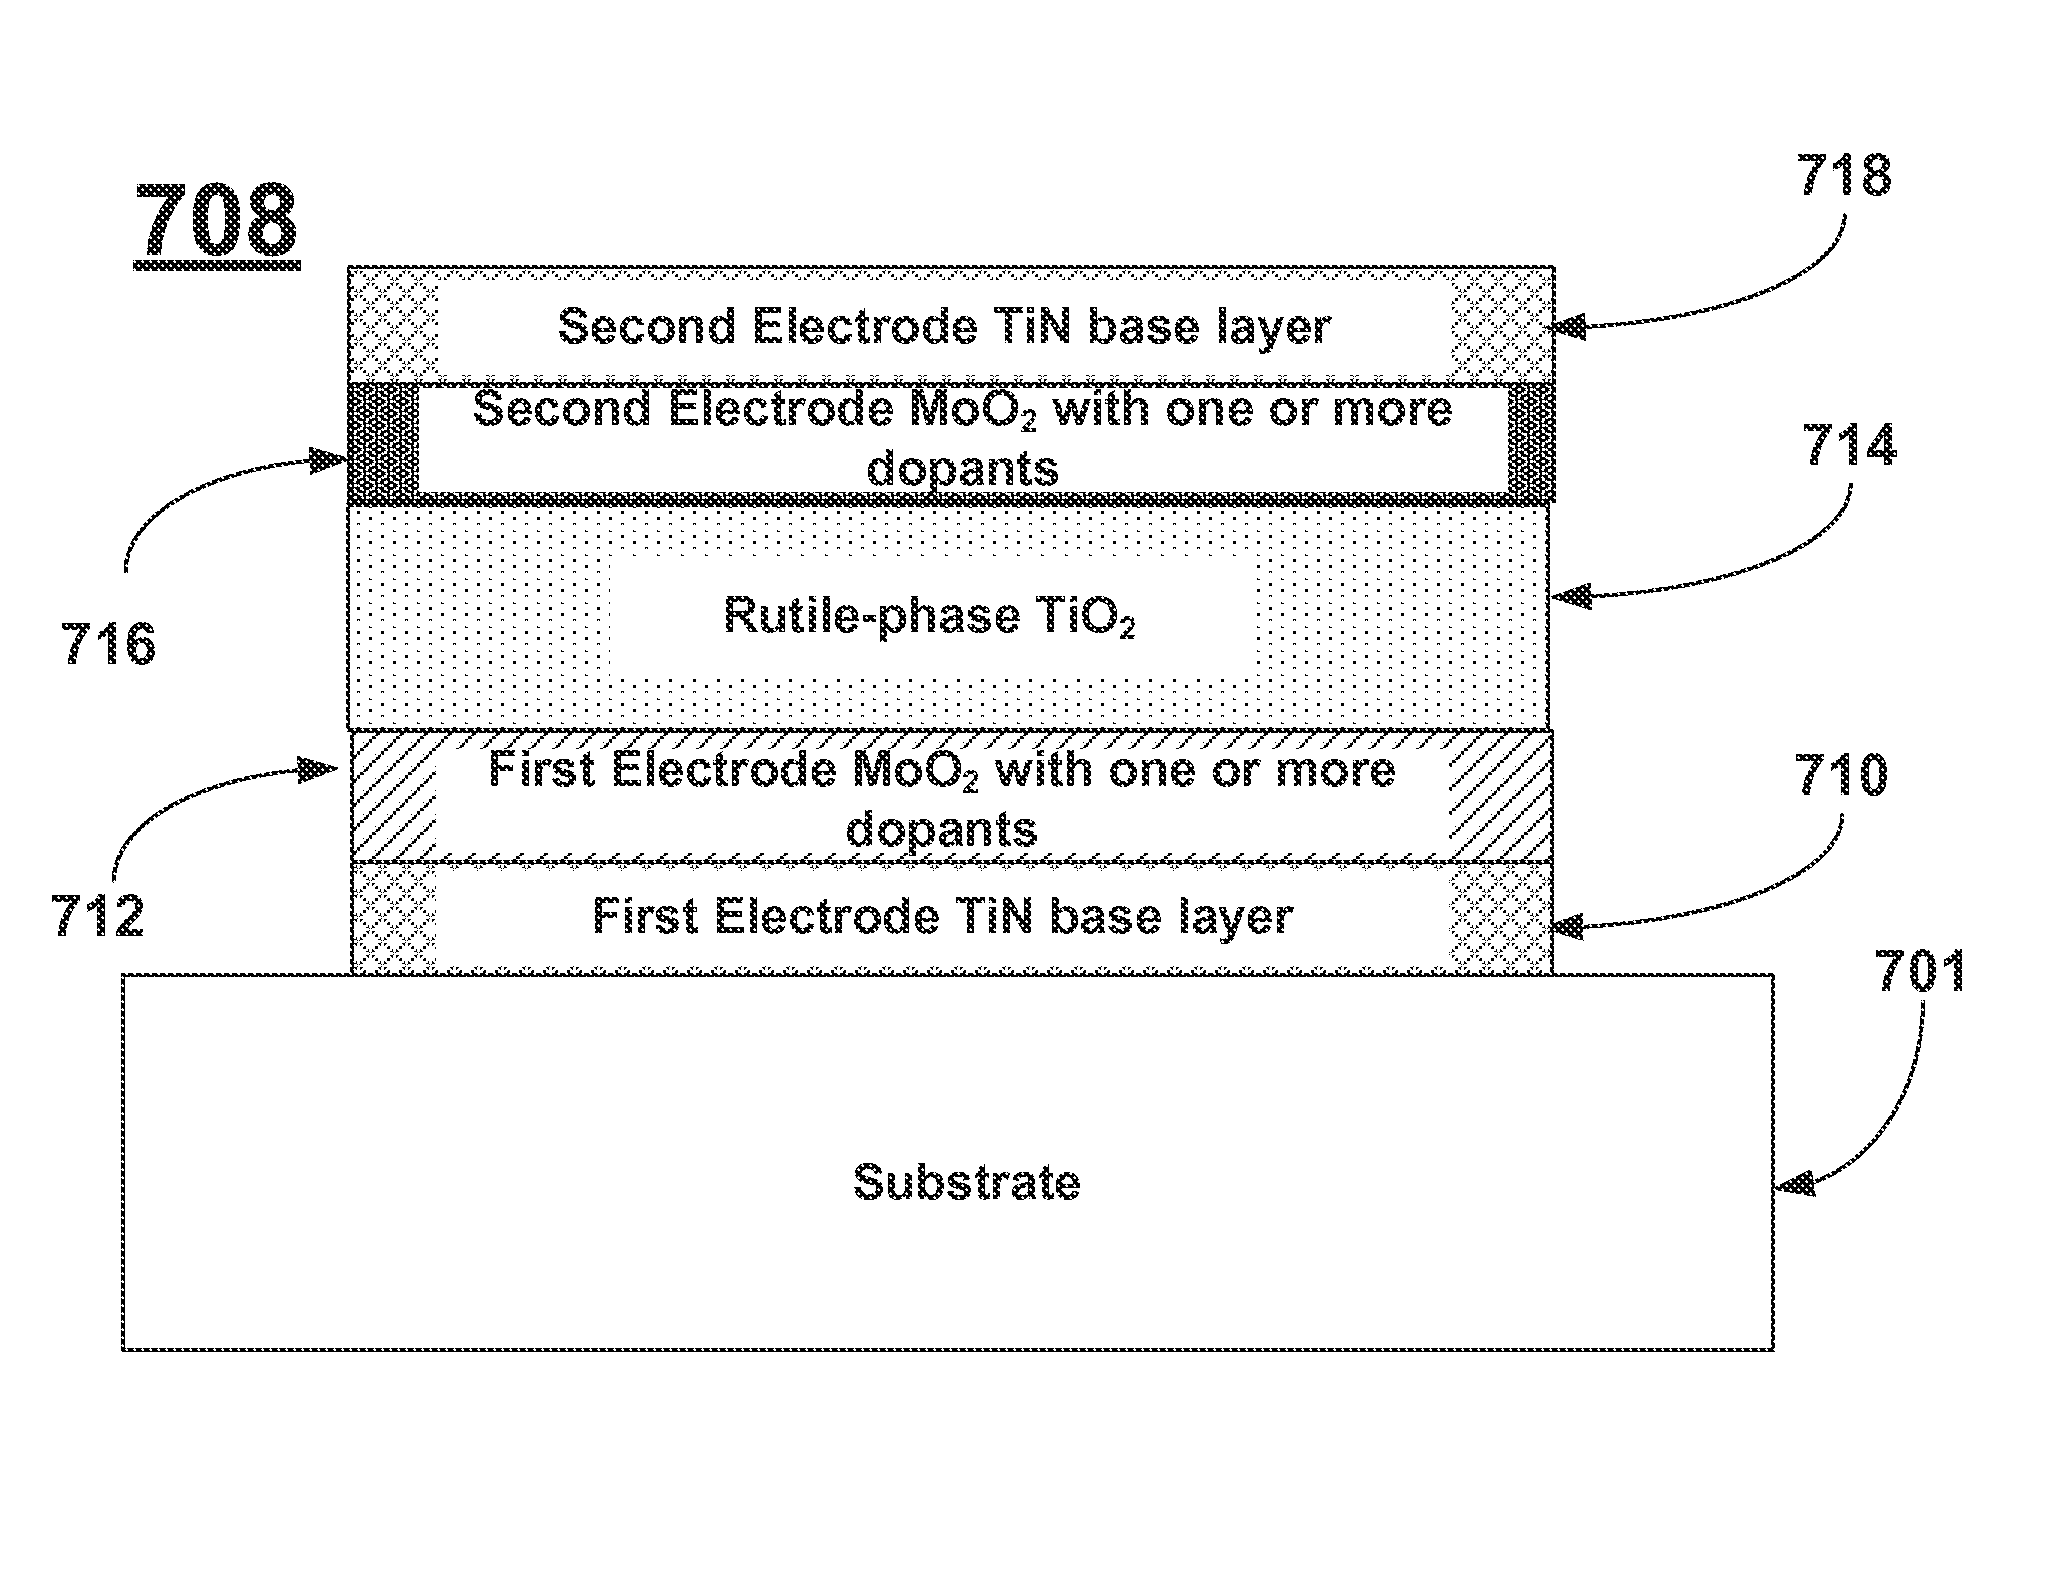 Enhanced non-noble electrode layers for DRAM capacitor cell